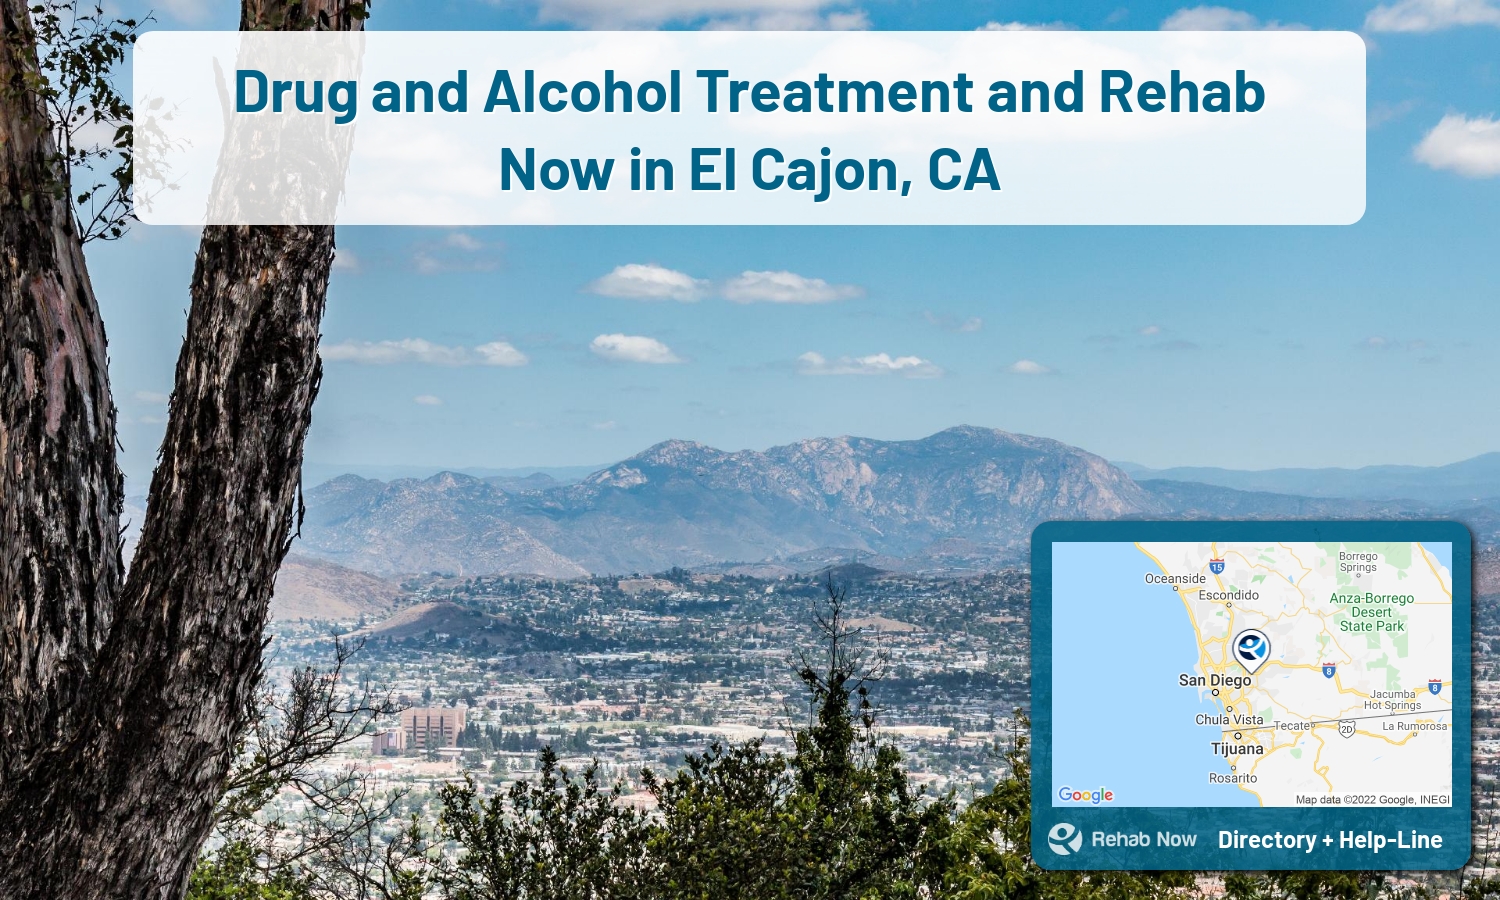 Our experts can help you find treatment now in El Cajon, California. We list drug rehab and alcohol centers in California.